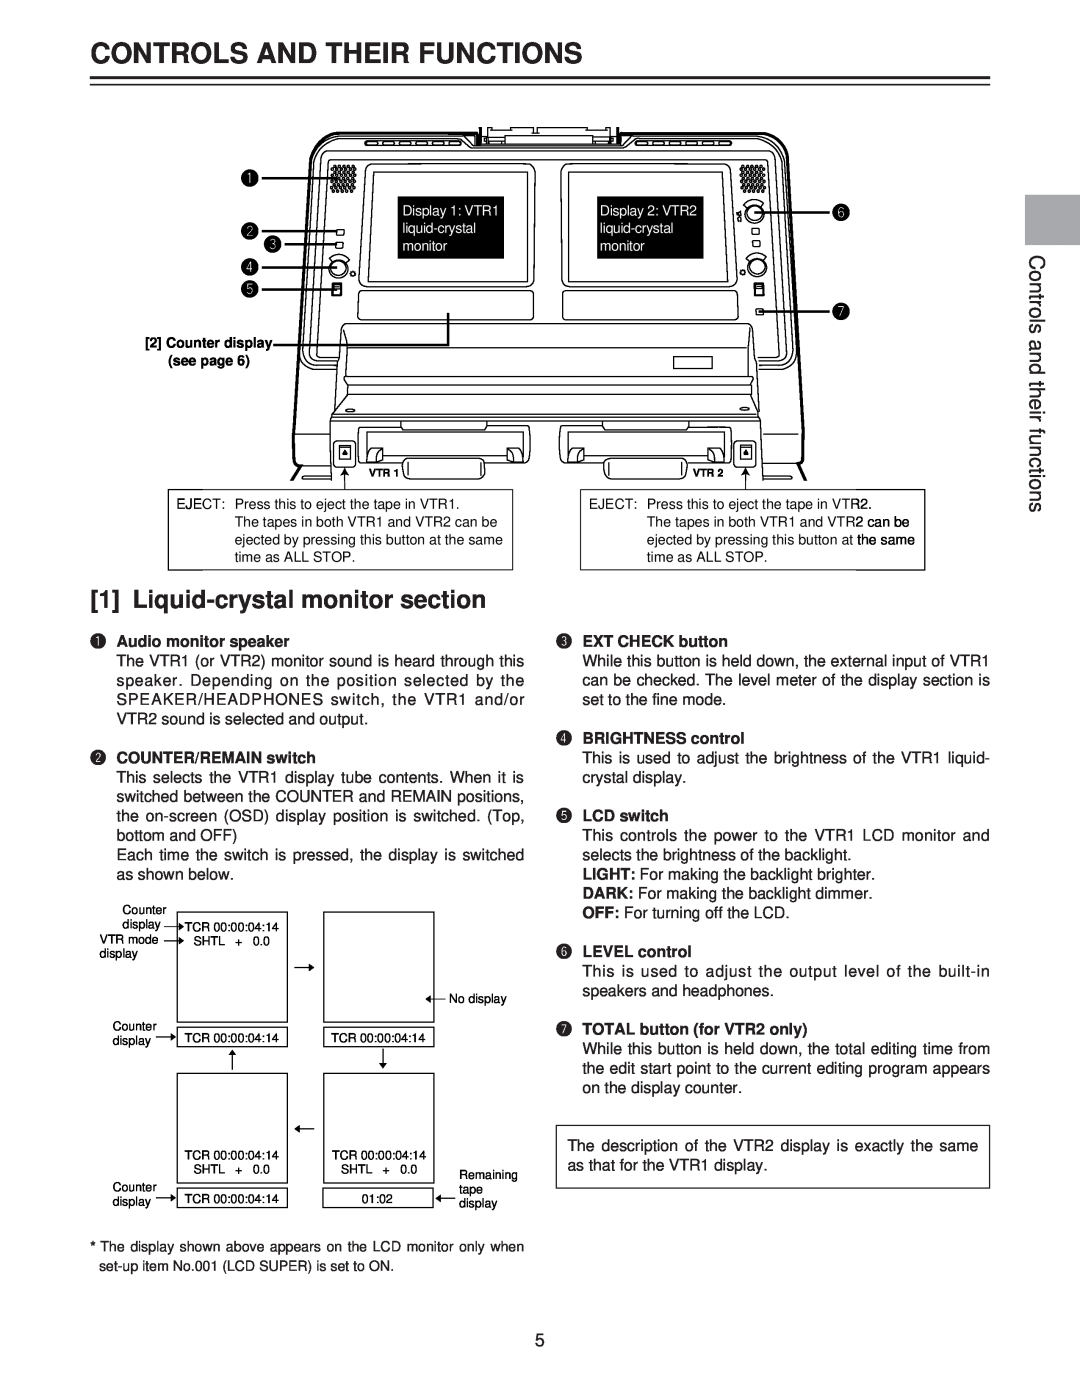 Panasonic AJ-LT85P manual Controls And Their Functions, Liquid-crystal monitor section, Controls and their functions 